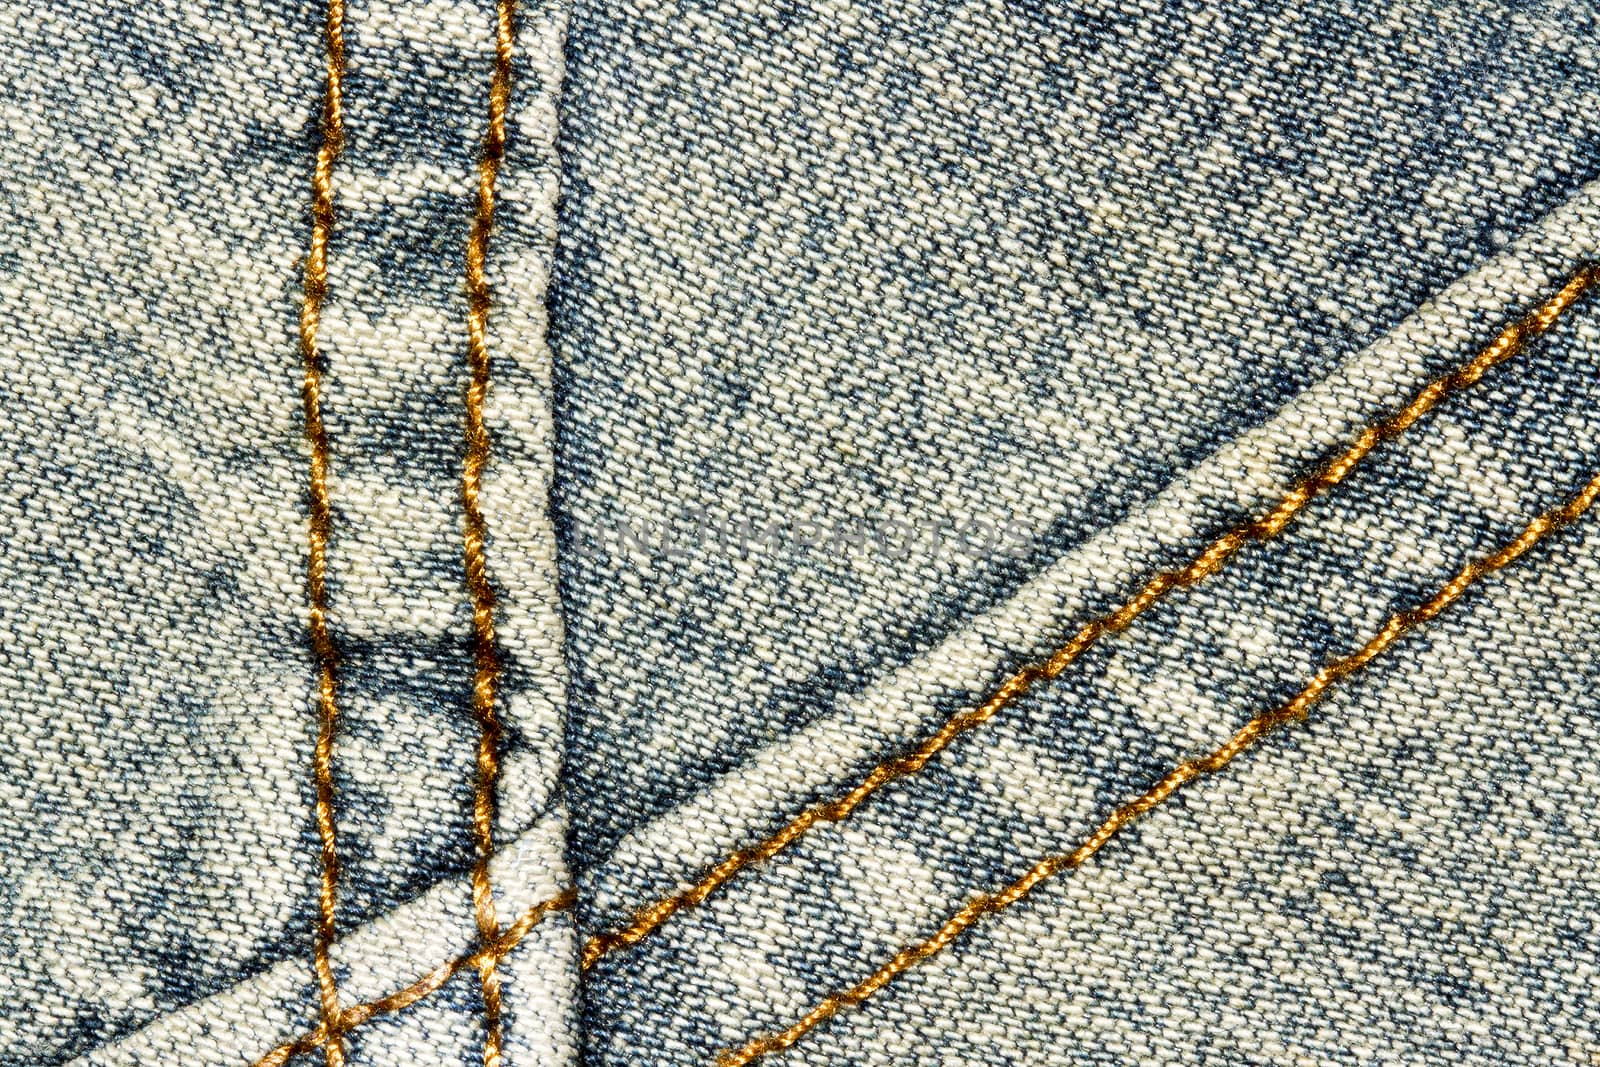 jeans texture background and seam for text area